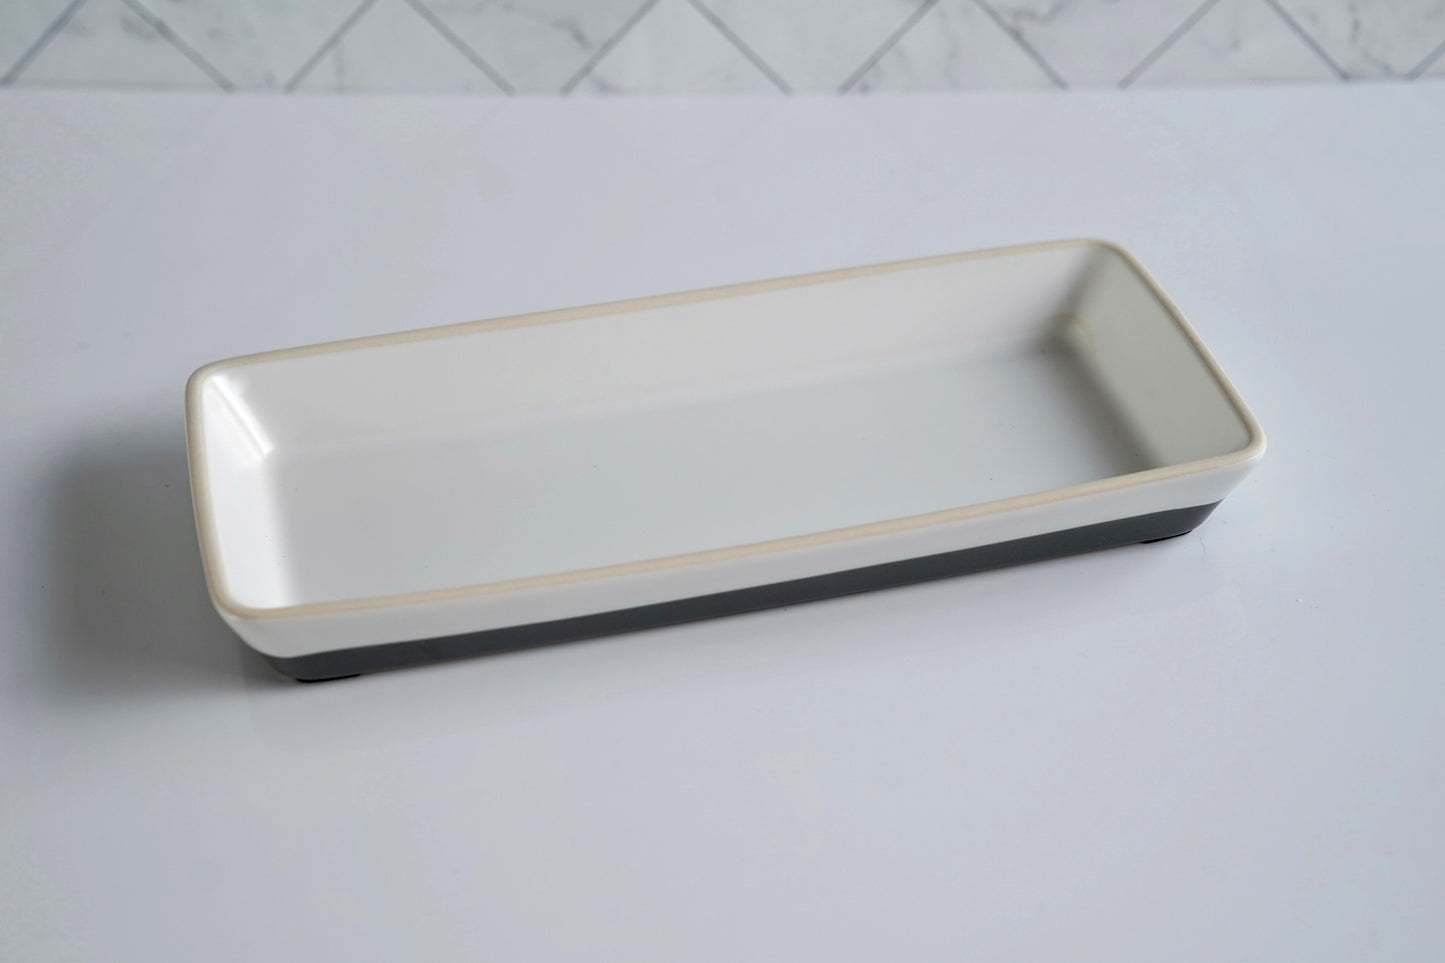 spice it you way - ceramic tray for kitchen